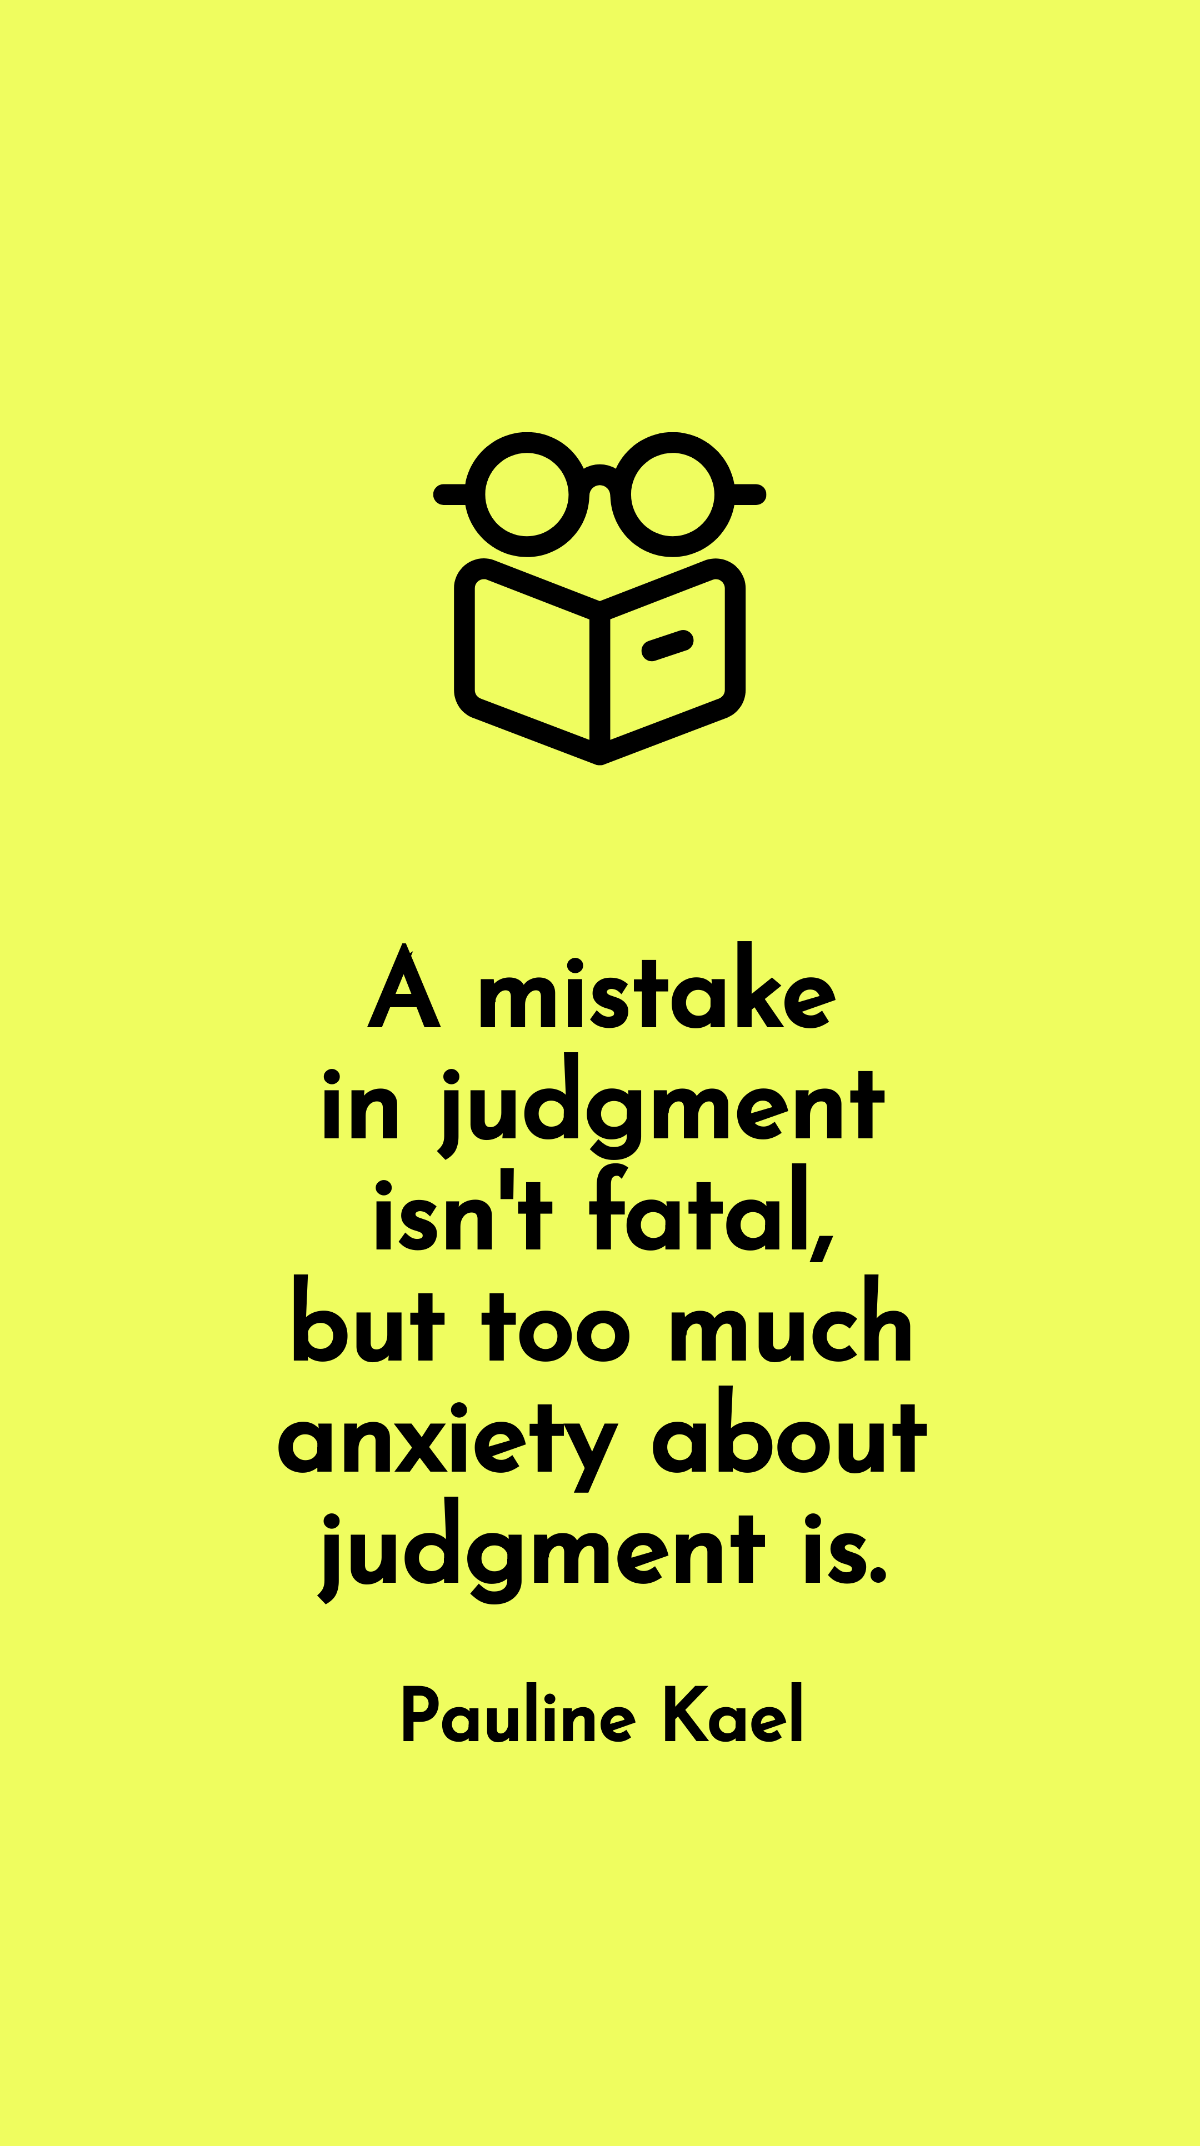 Pauline Kael - A mistake in judgment isn't fatal, but too much anxiety about judgment is. Template